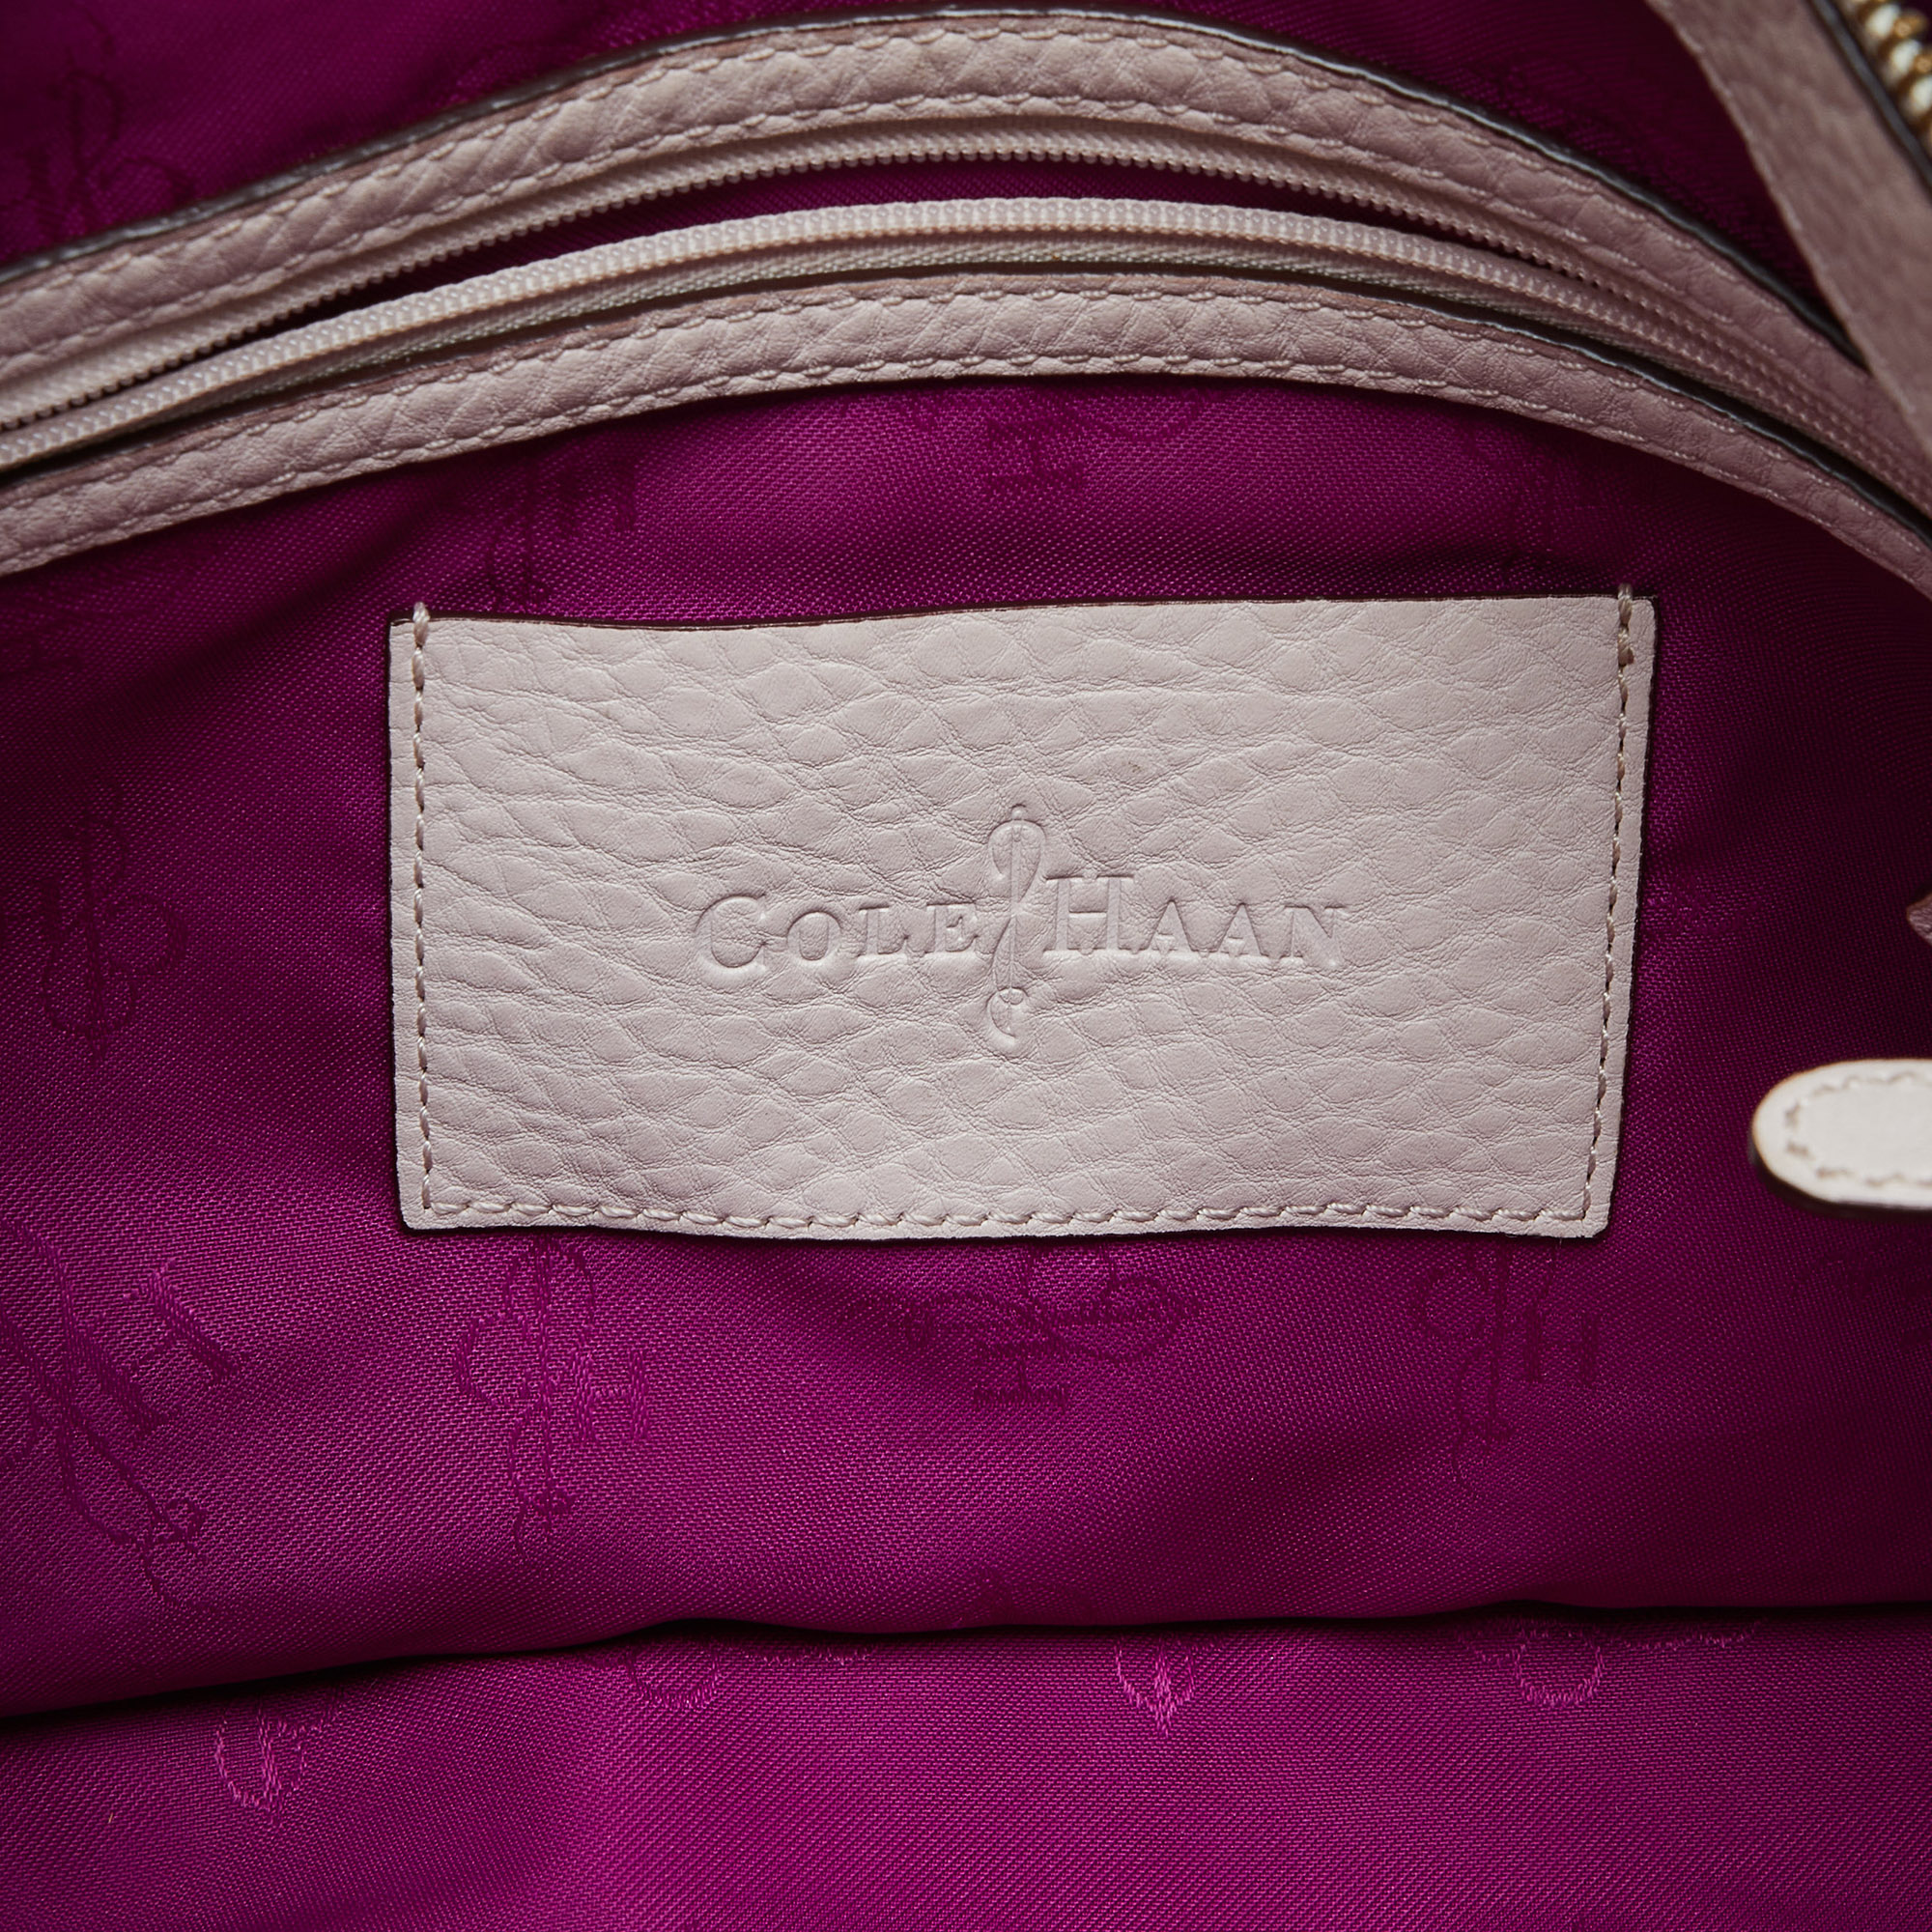 Cole Haan Pink Pebbled Leather Tote